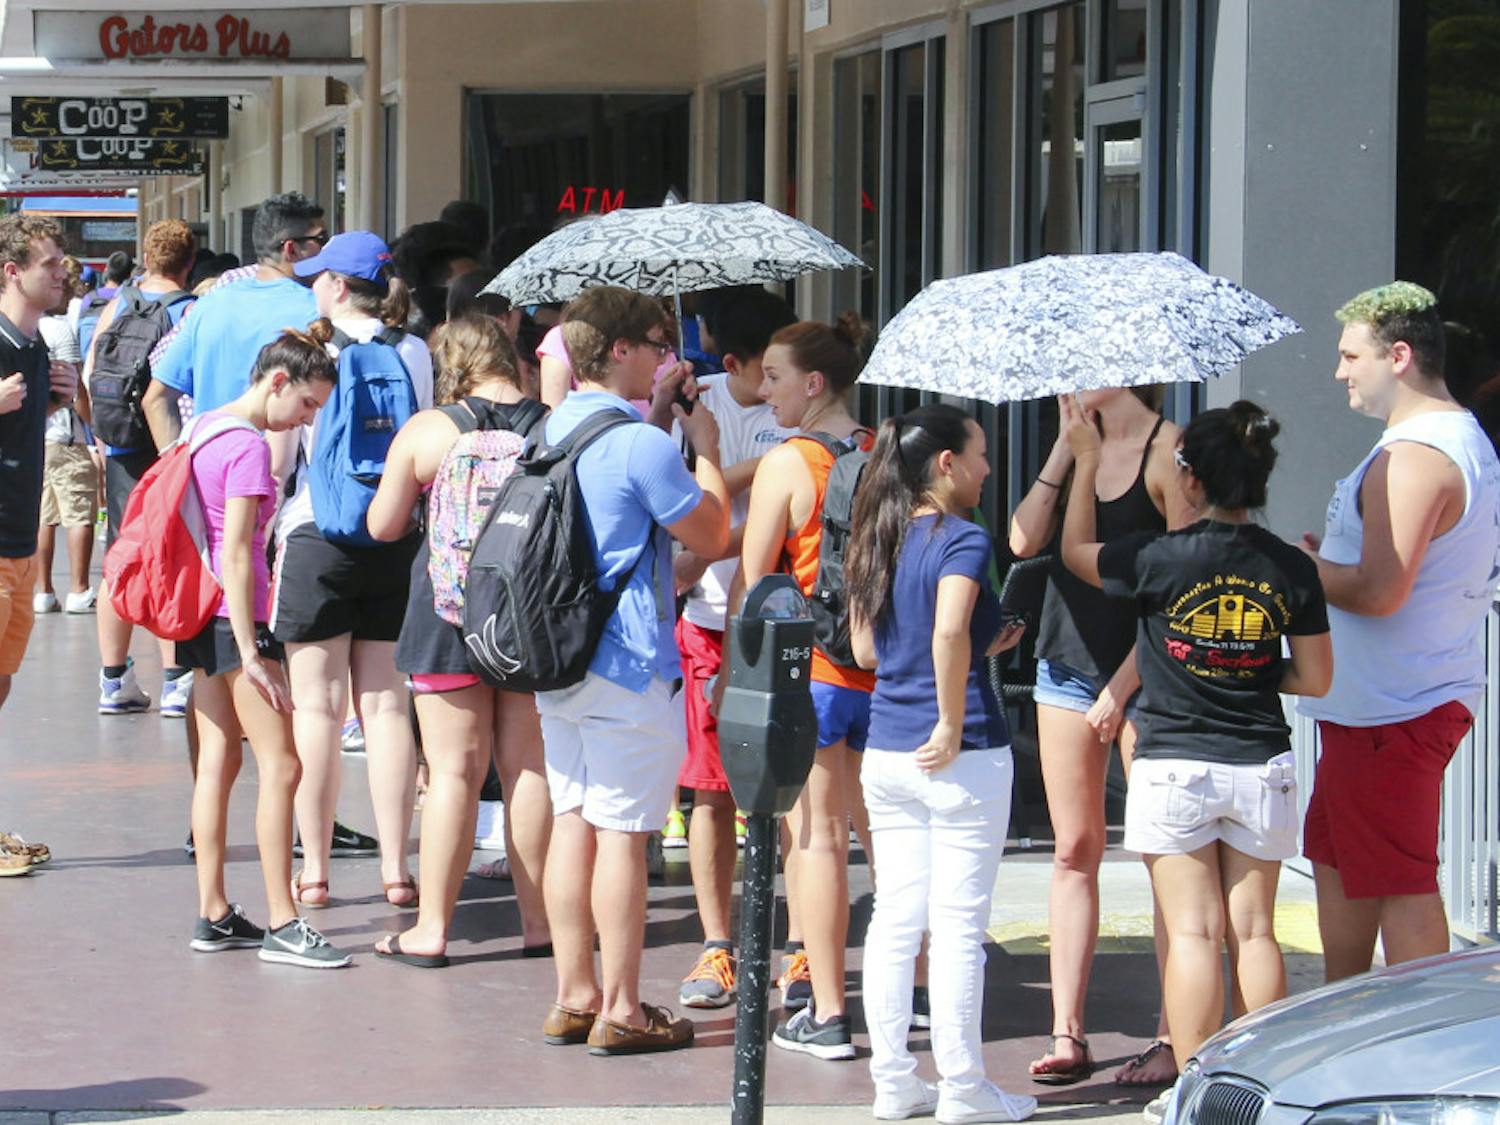 Students line up outside The Coop on University Ave. Wedesnday afternoon for free chicken tenders and sweet tea.